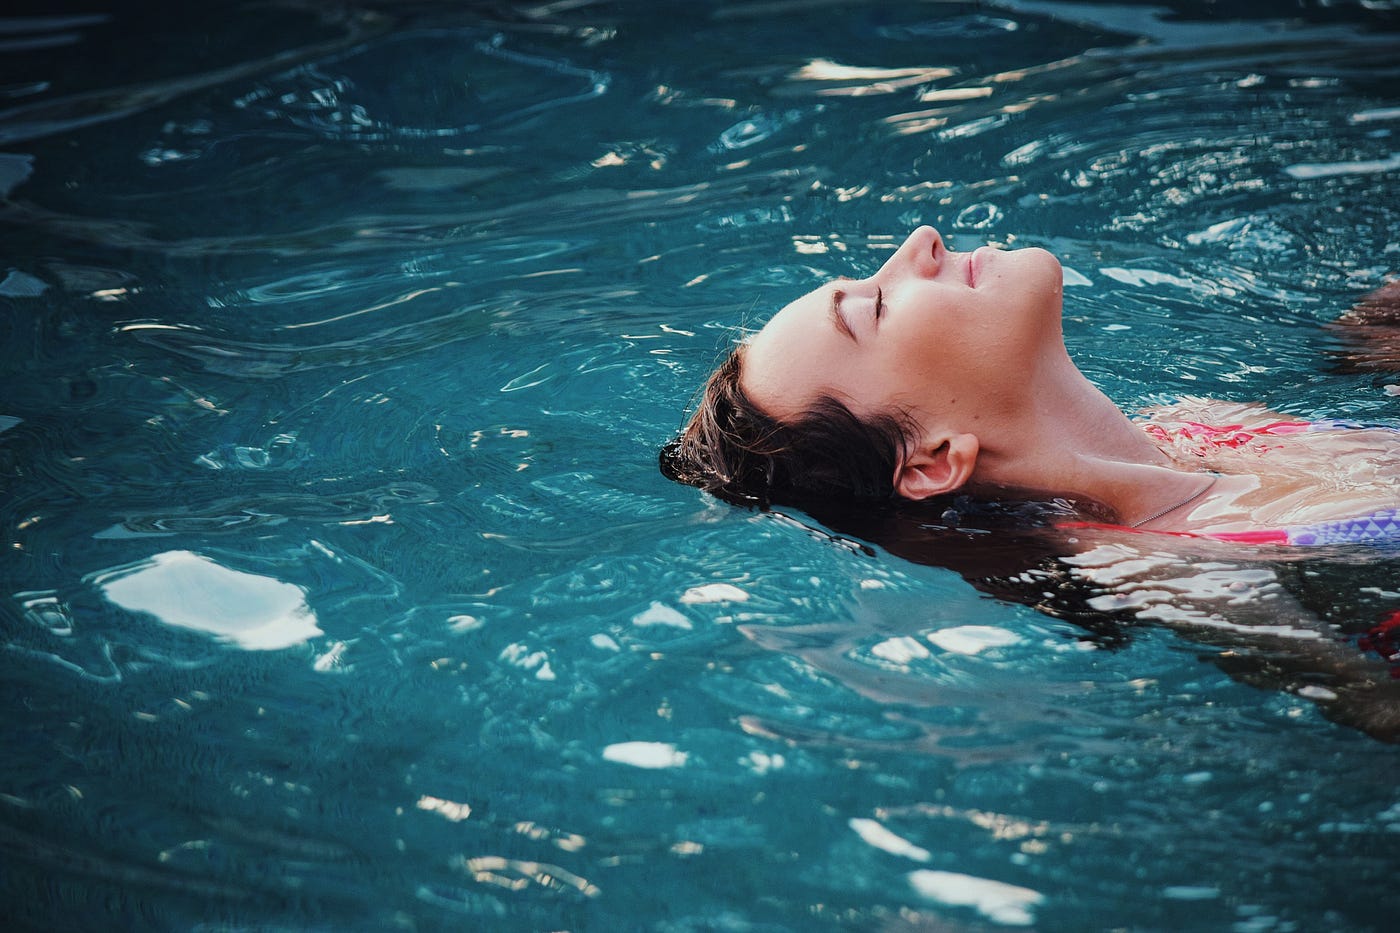 A woman floats in a pool. We see her from upper chest level up, emerging from the right side of the image. She is white and has brown hair.